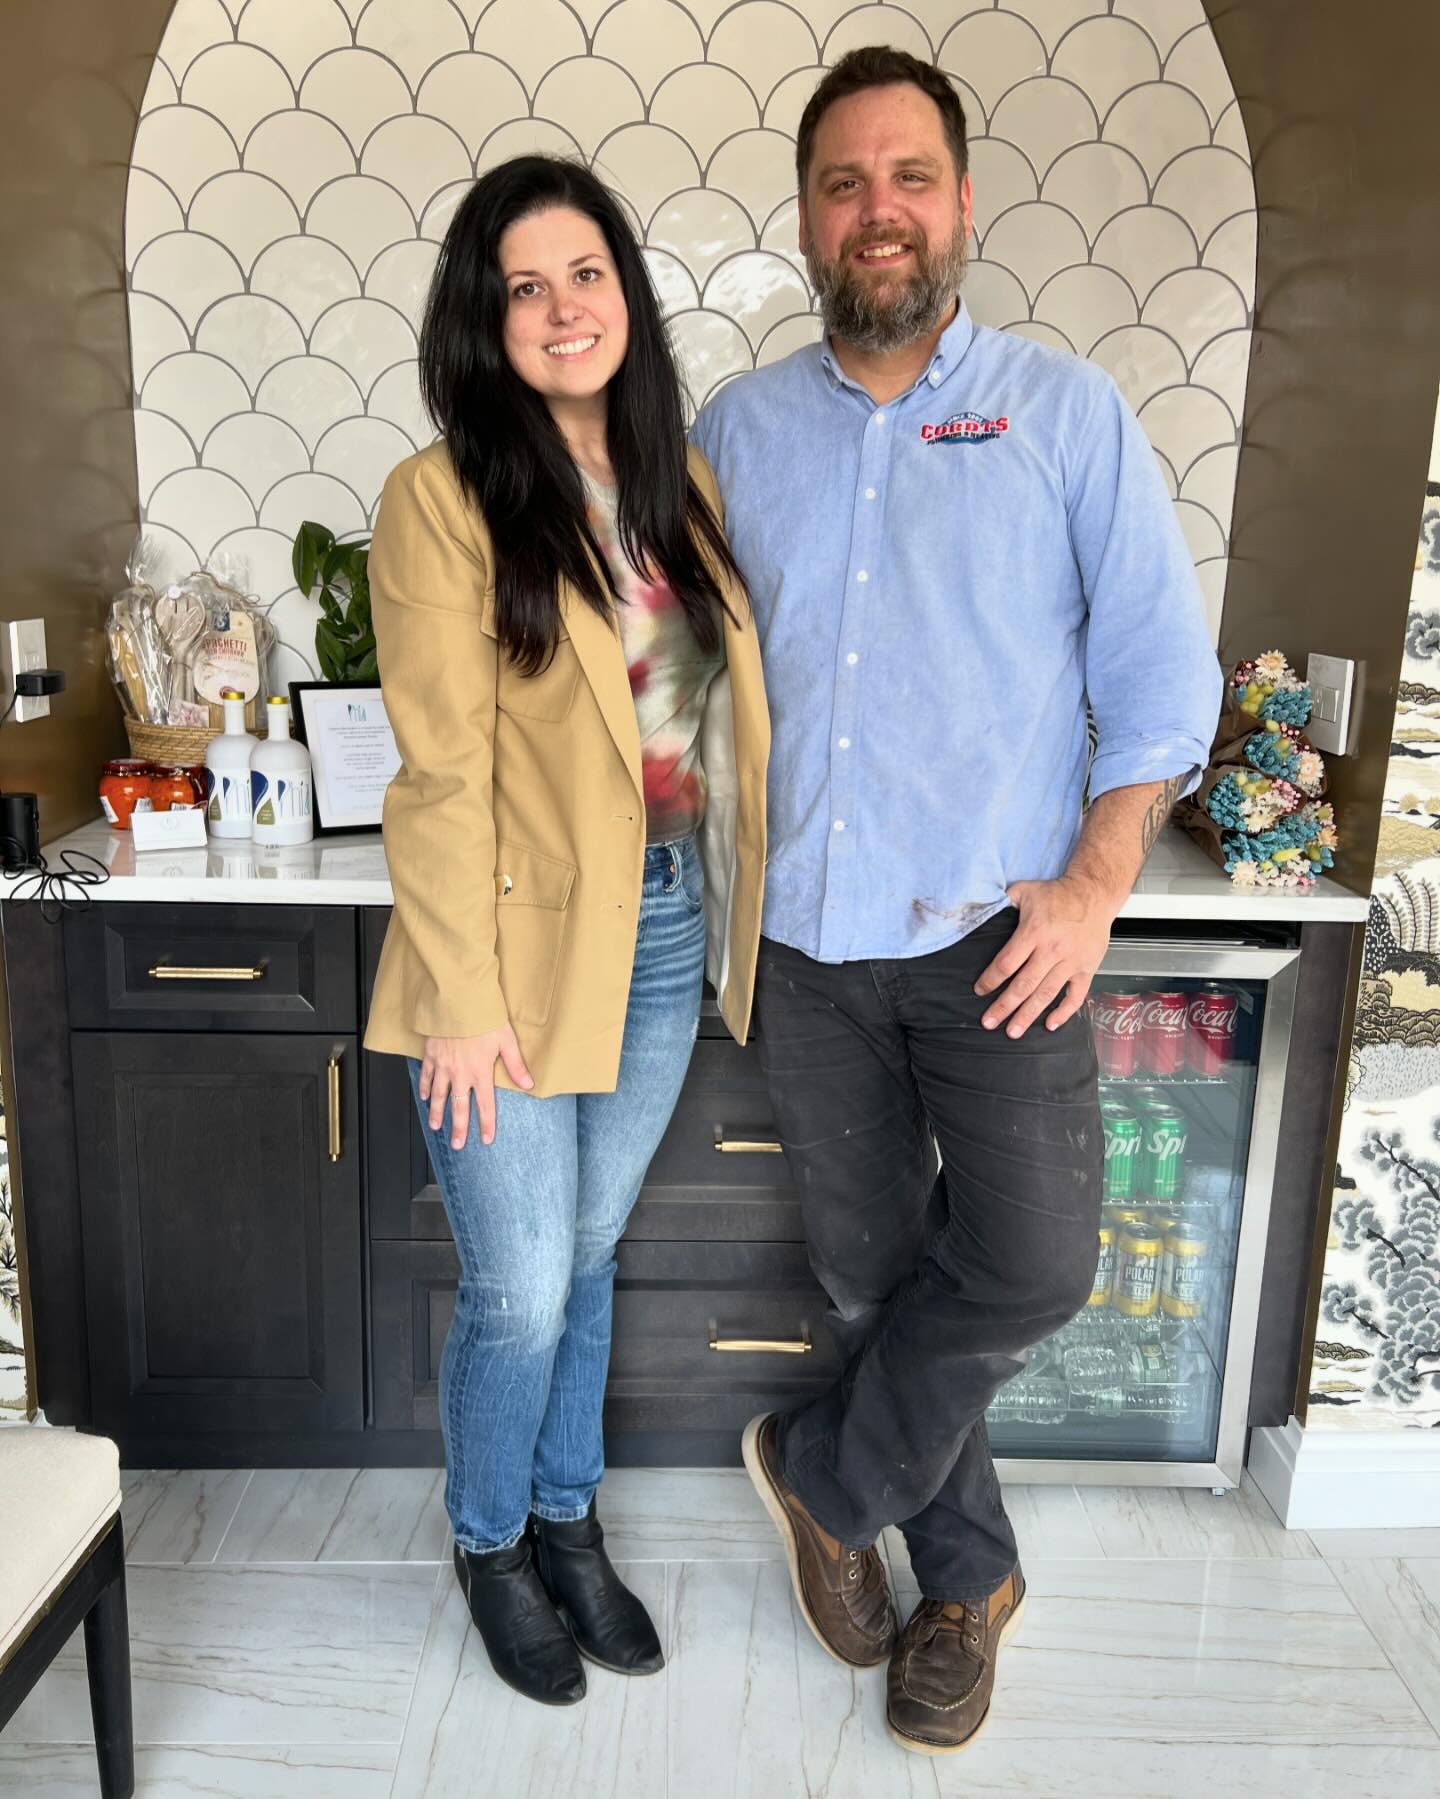 Go follow @cordts_plumbing and be first to know about the release of the Rotelli Interiors episode of the Plumb Bums podcast next Tuesday! 

I really enjoyed connecting with Phil + Max on their show and getting to talk candidly about the business of 